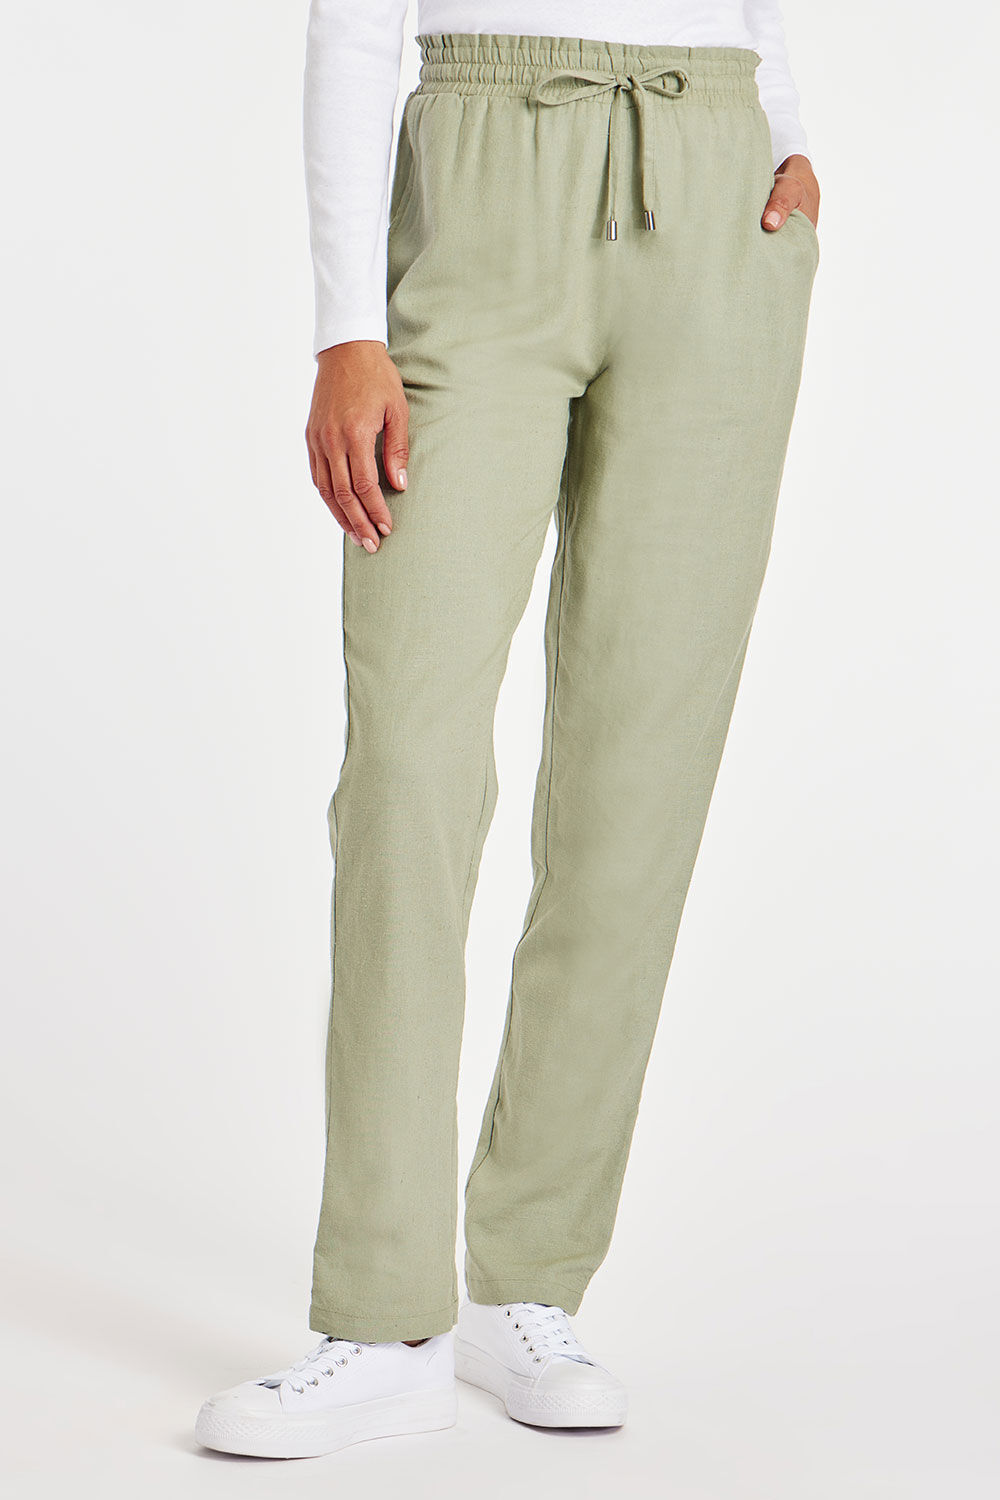 Bonmarche Sage Paperbag Tie Waist Tapered Linen Trousers, Size: 12